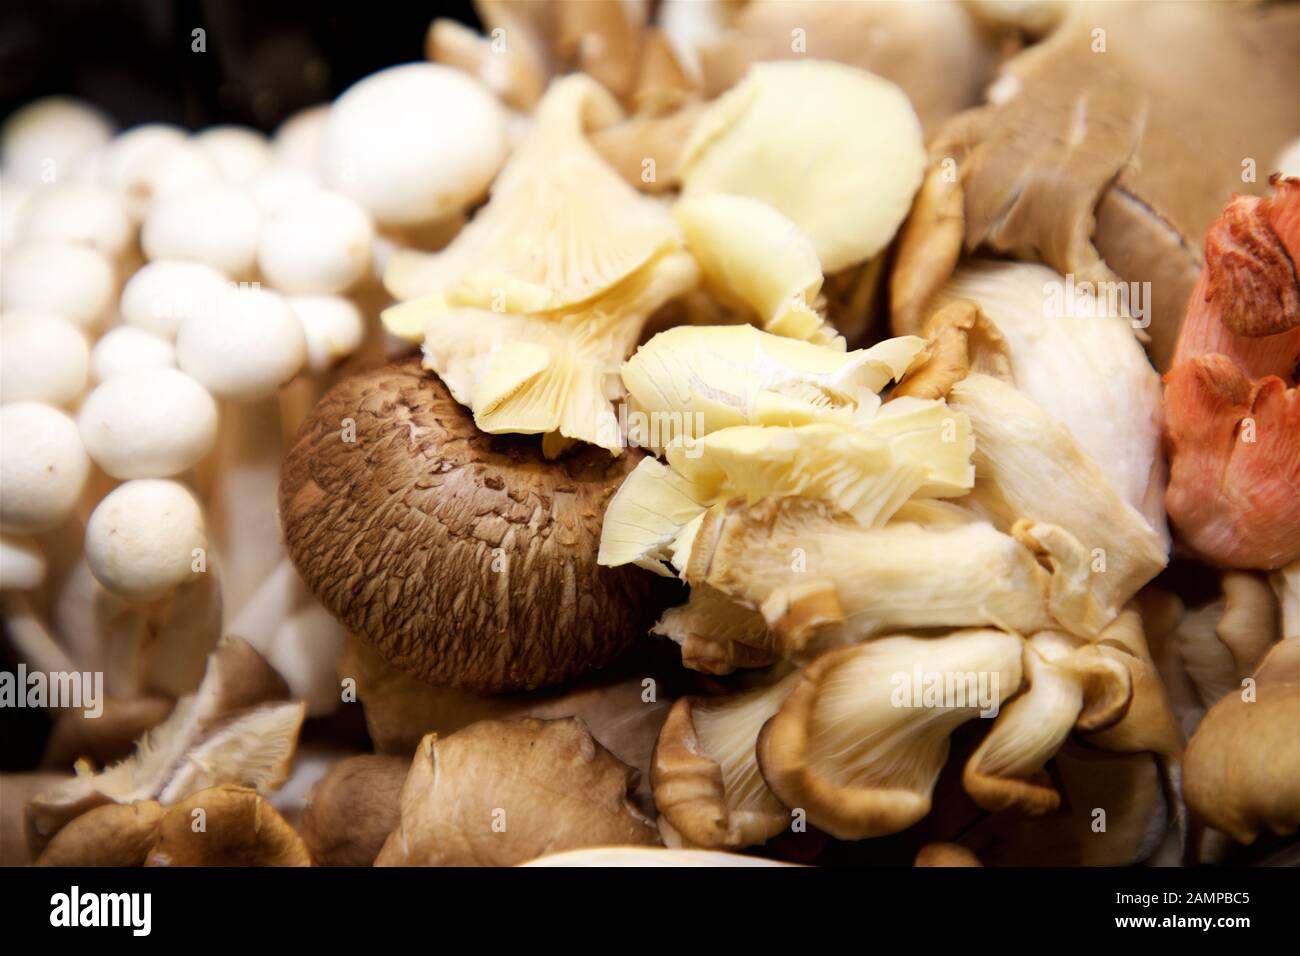 Close-up shot of a collection of various wild mushrooms. Stock Photo